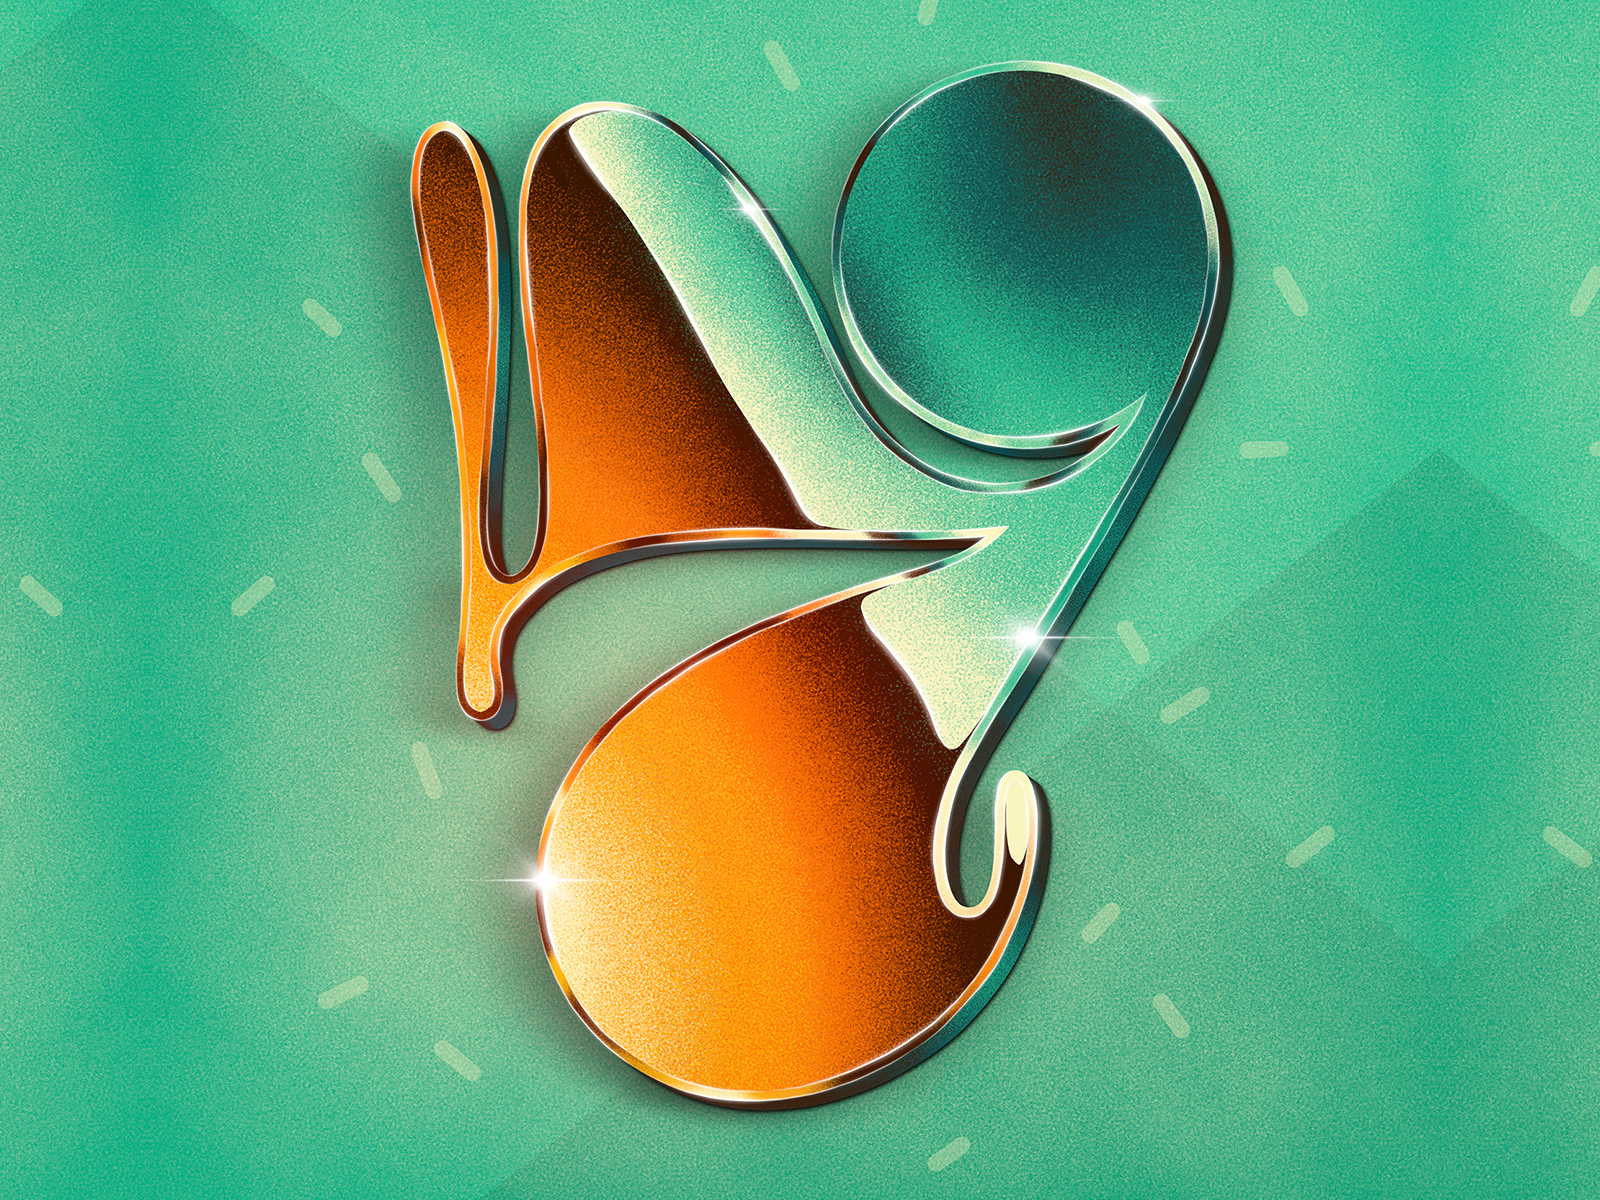 3d lettering procreate brushes free